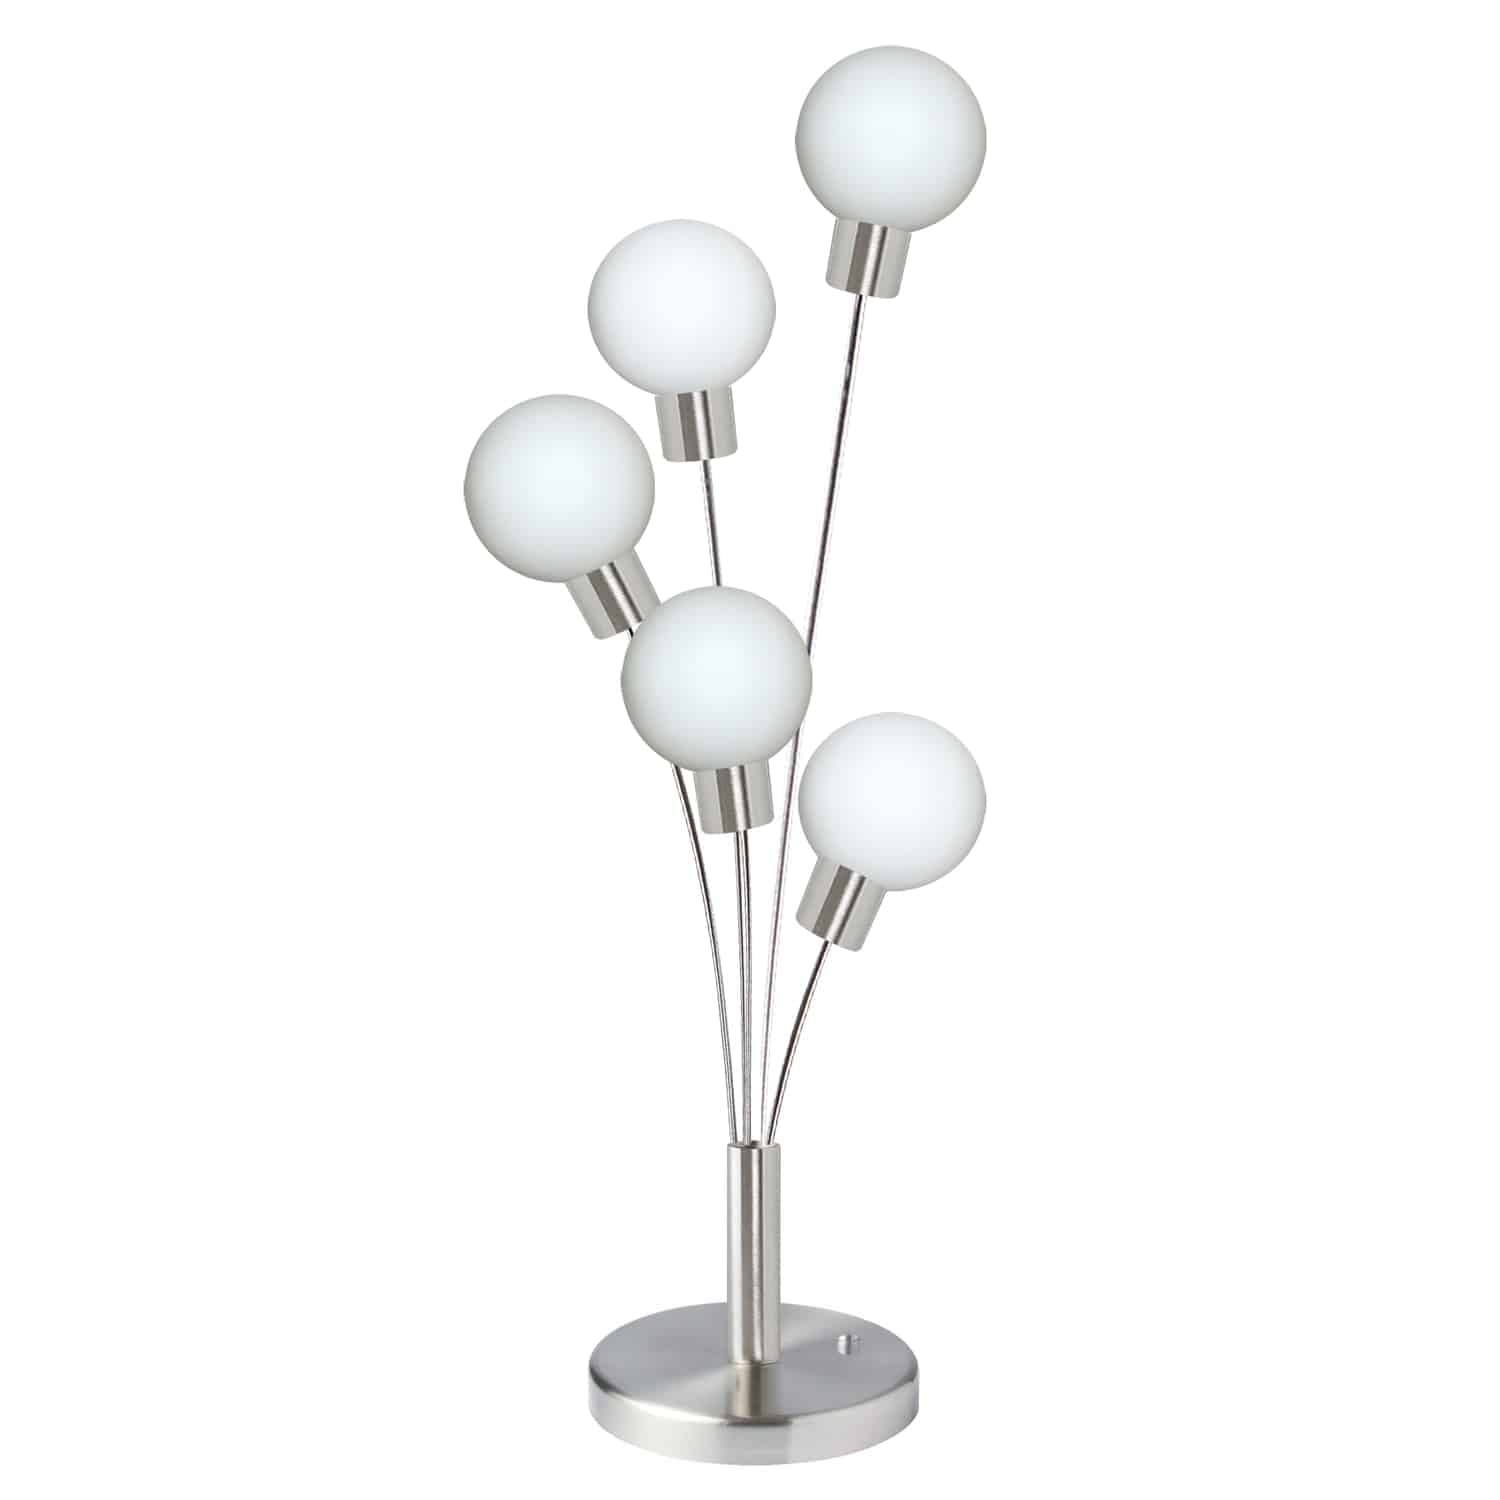 5 Light Incandescent Table Lamp Satin Chrome Finish with White Glass